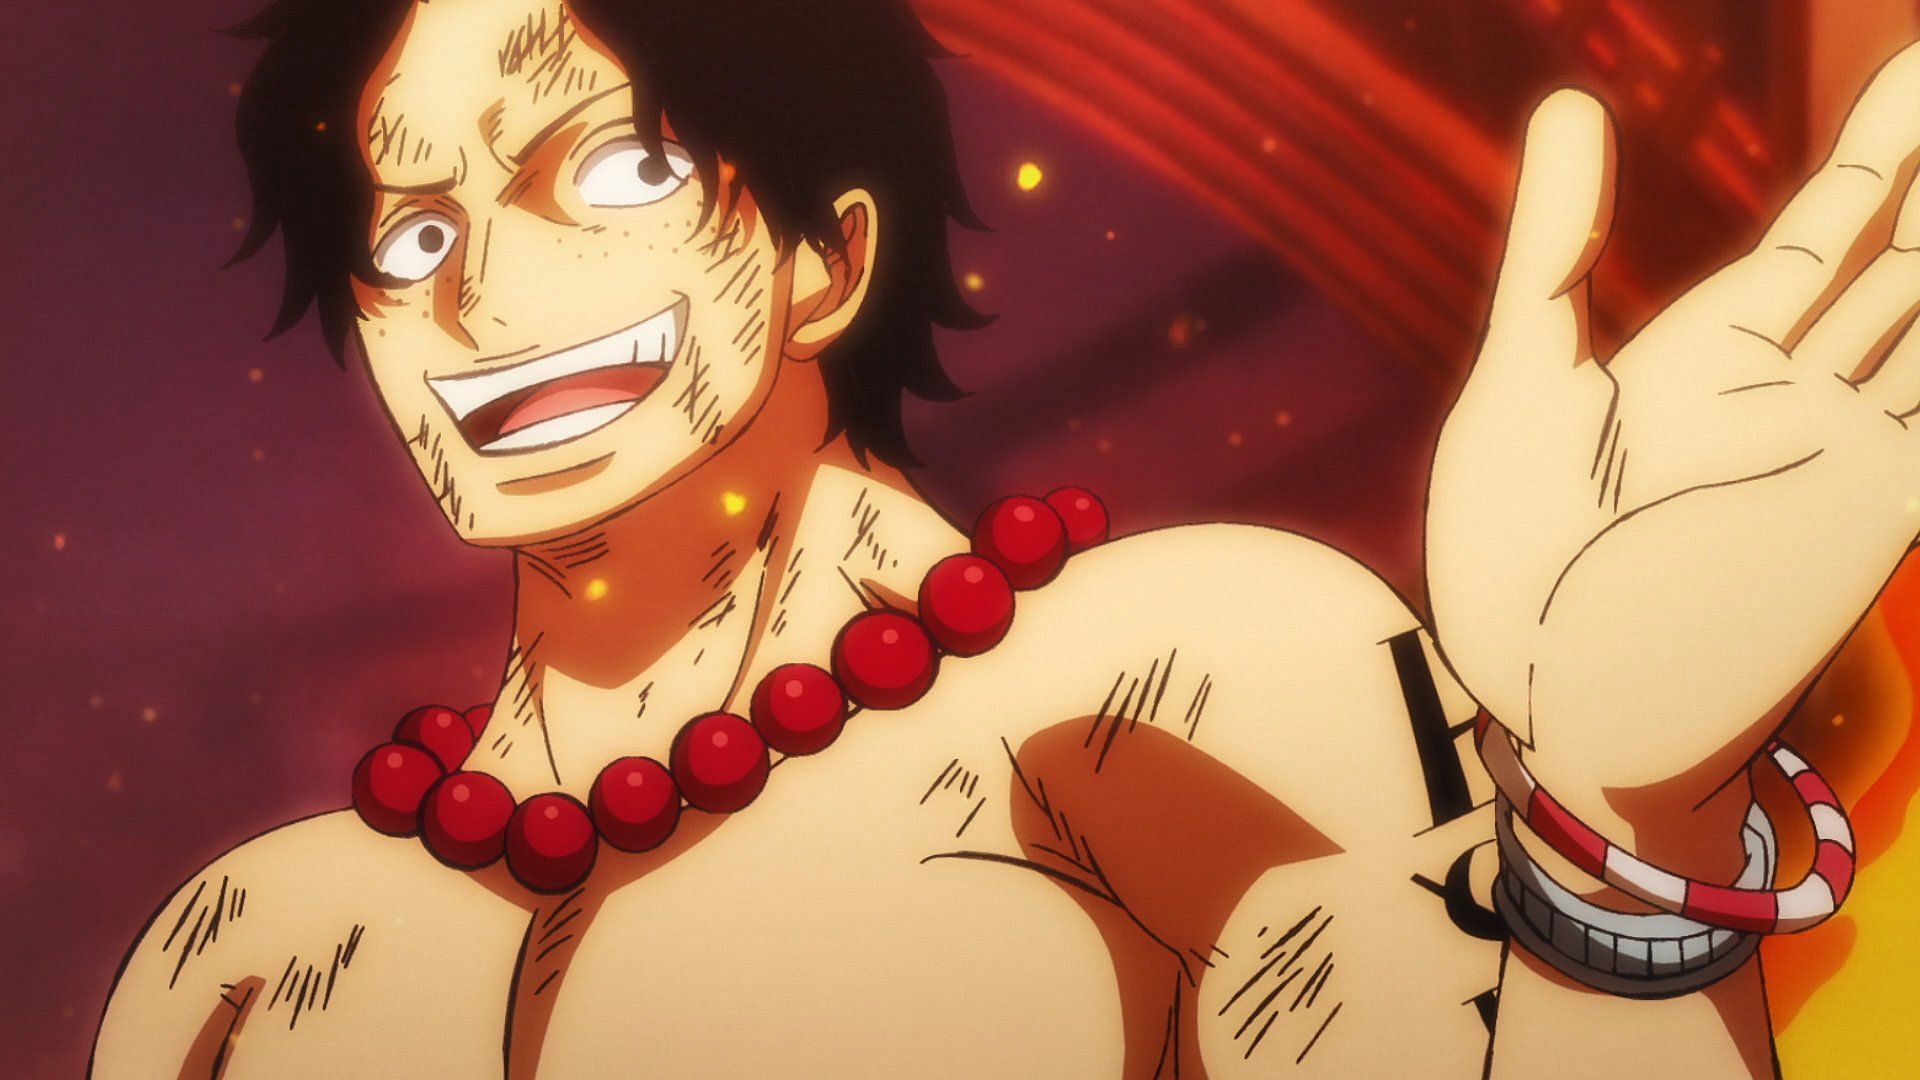 "Fire Fist" Portuguese D. Ace was Luffy's adoptive brother (Image via Toei Animation, One Piece)